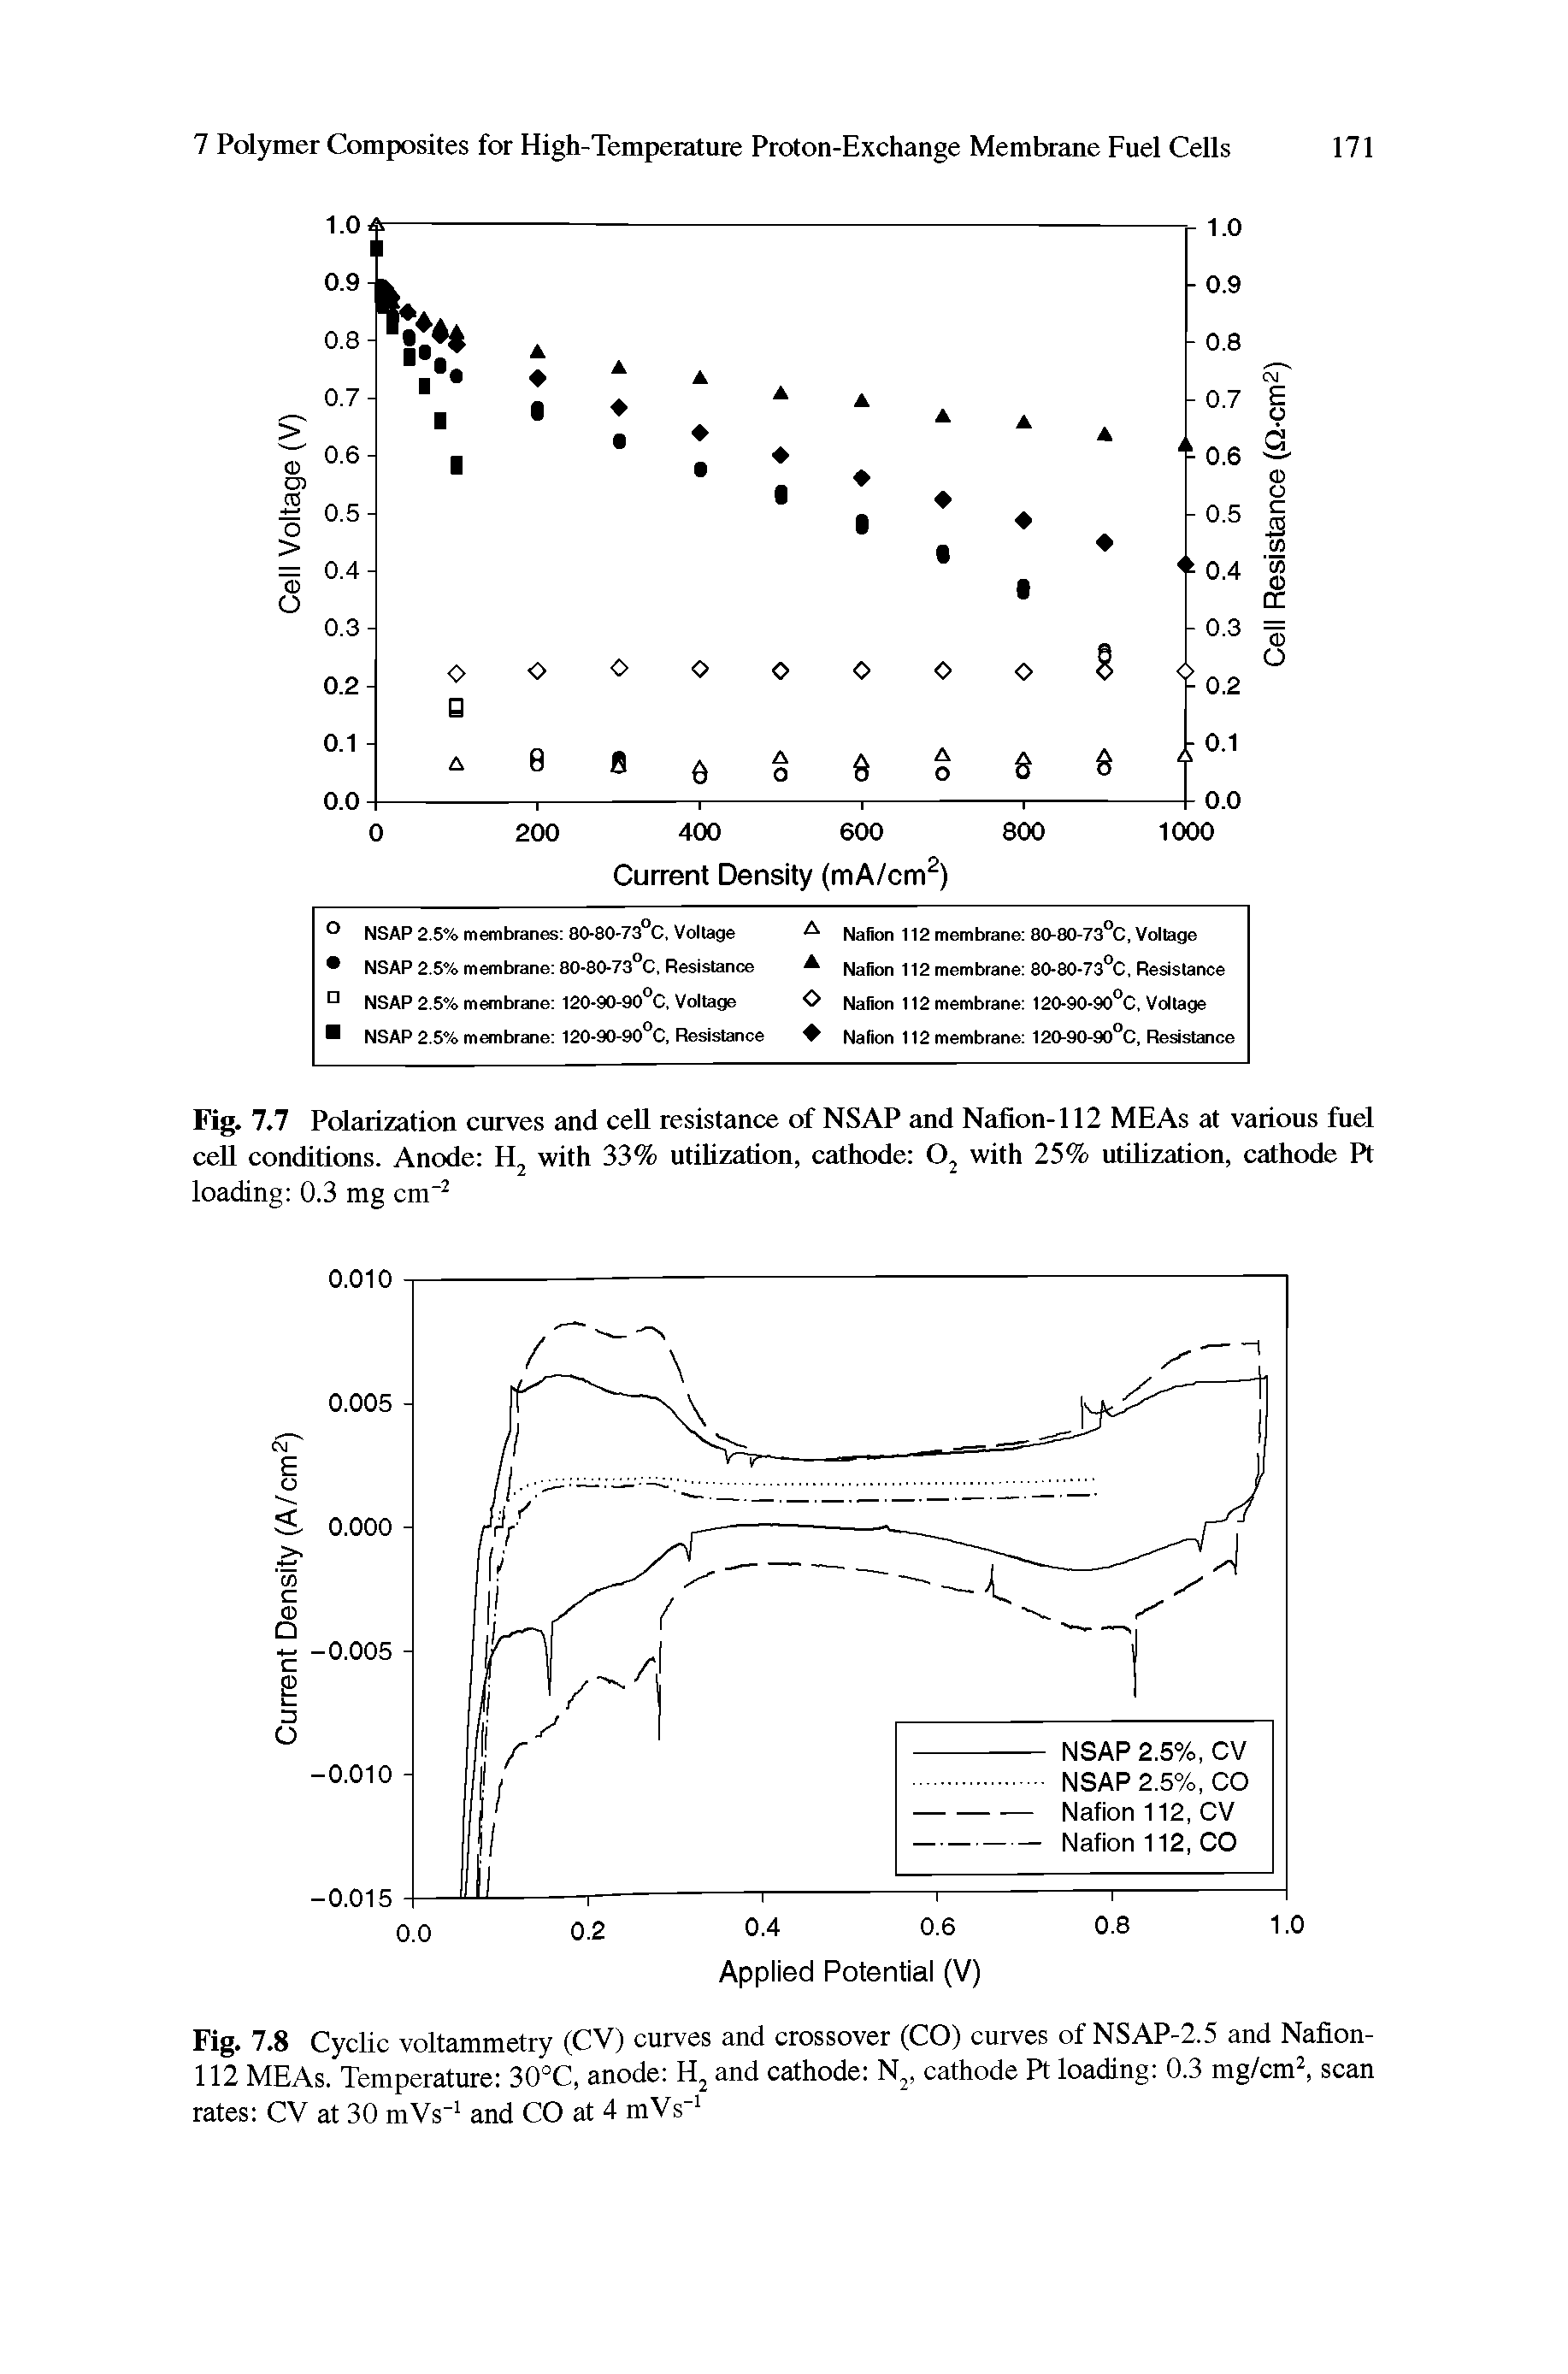 Fig. 7.8 Cyclic voltammetry (CV) curves and crossover (CO) curves of NSAP-2.5 and Nafion-112 MEAs. Temperature 30°C, anode and cathode N, cathode Pt loading 0.3 mg/cm, scan rates CV at 30 mVs" and CO at 4 mVs ...